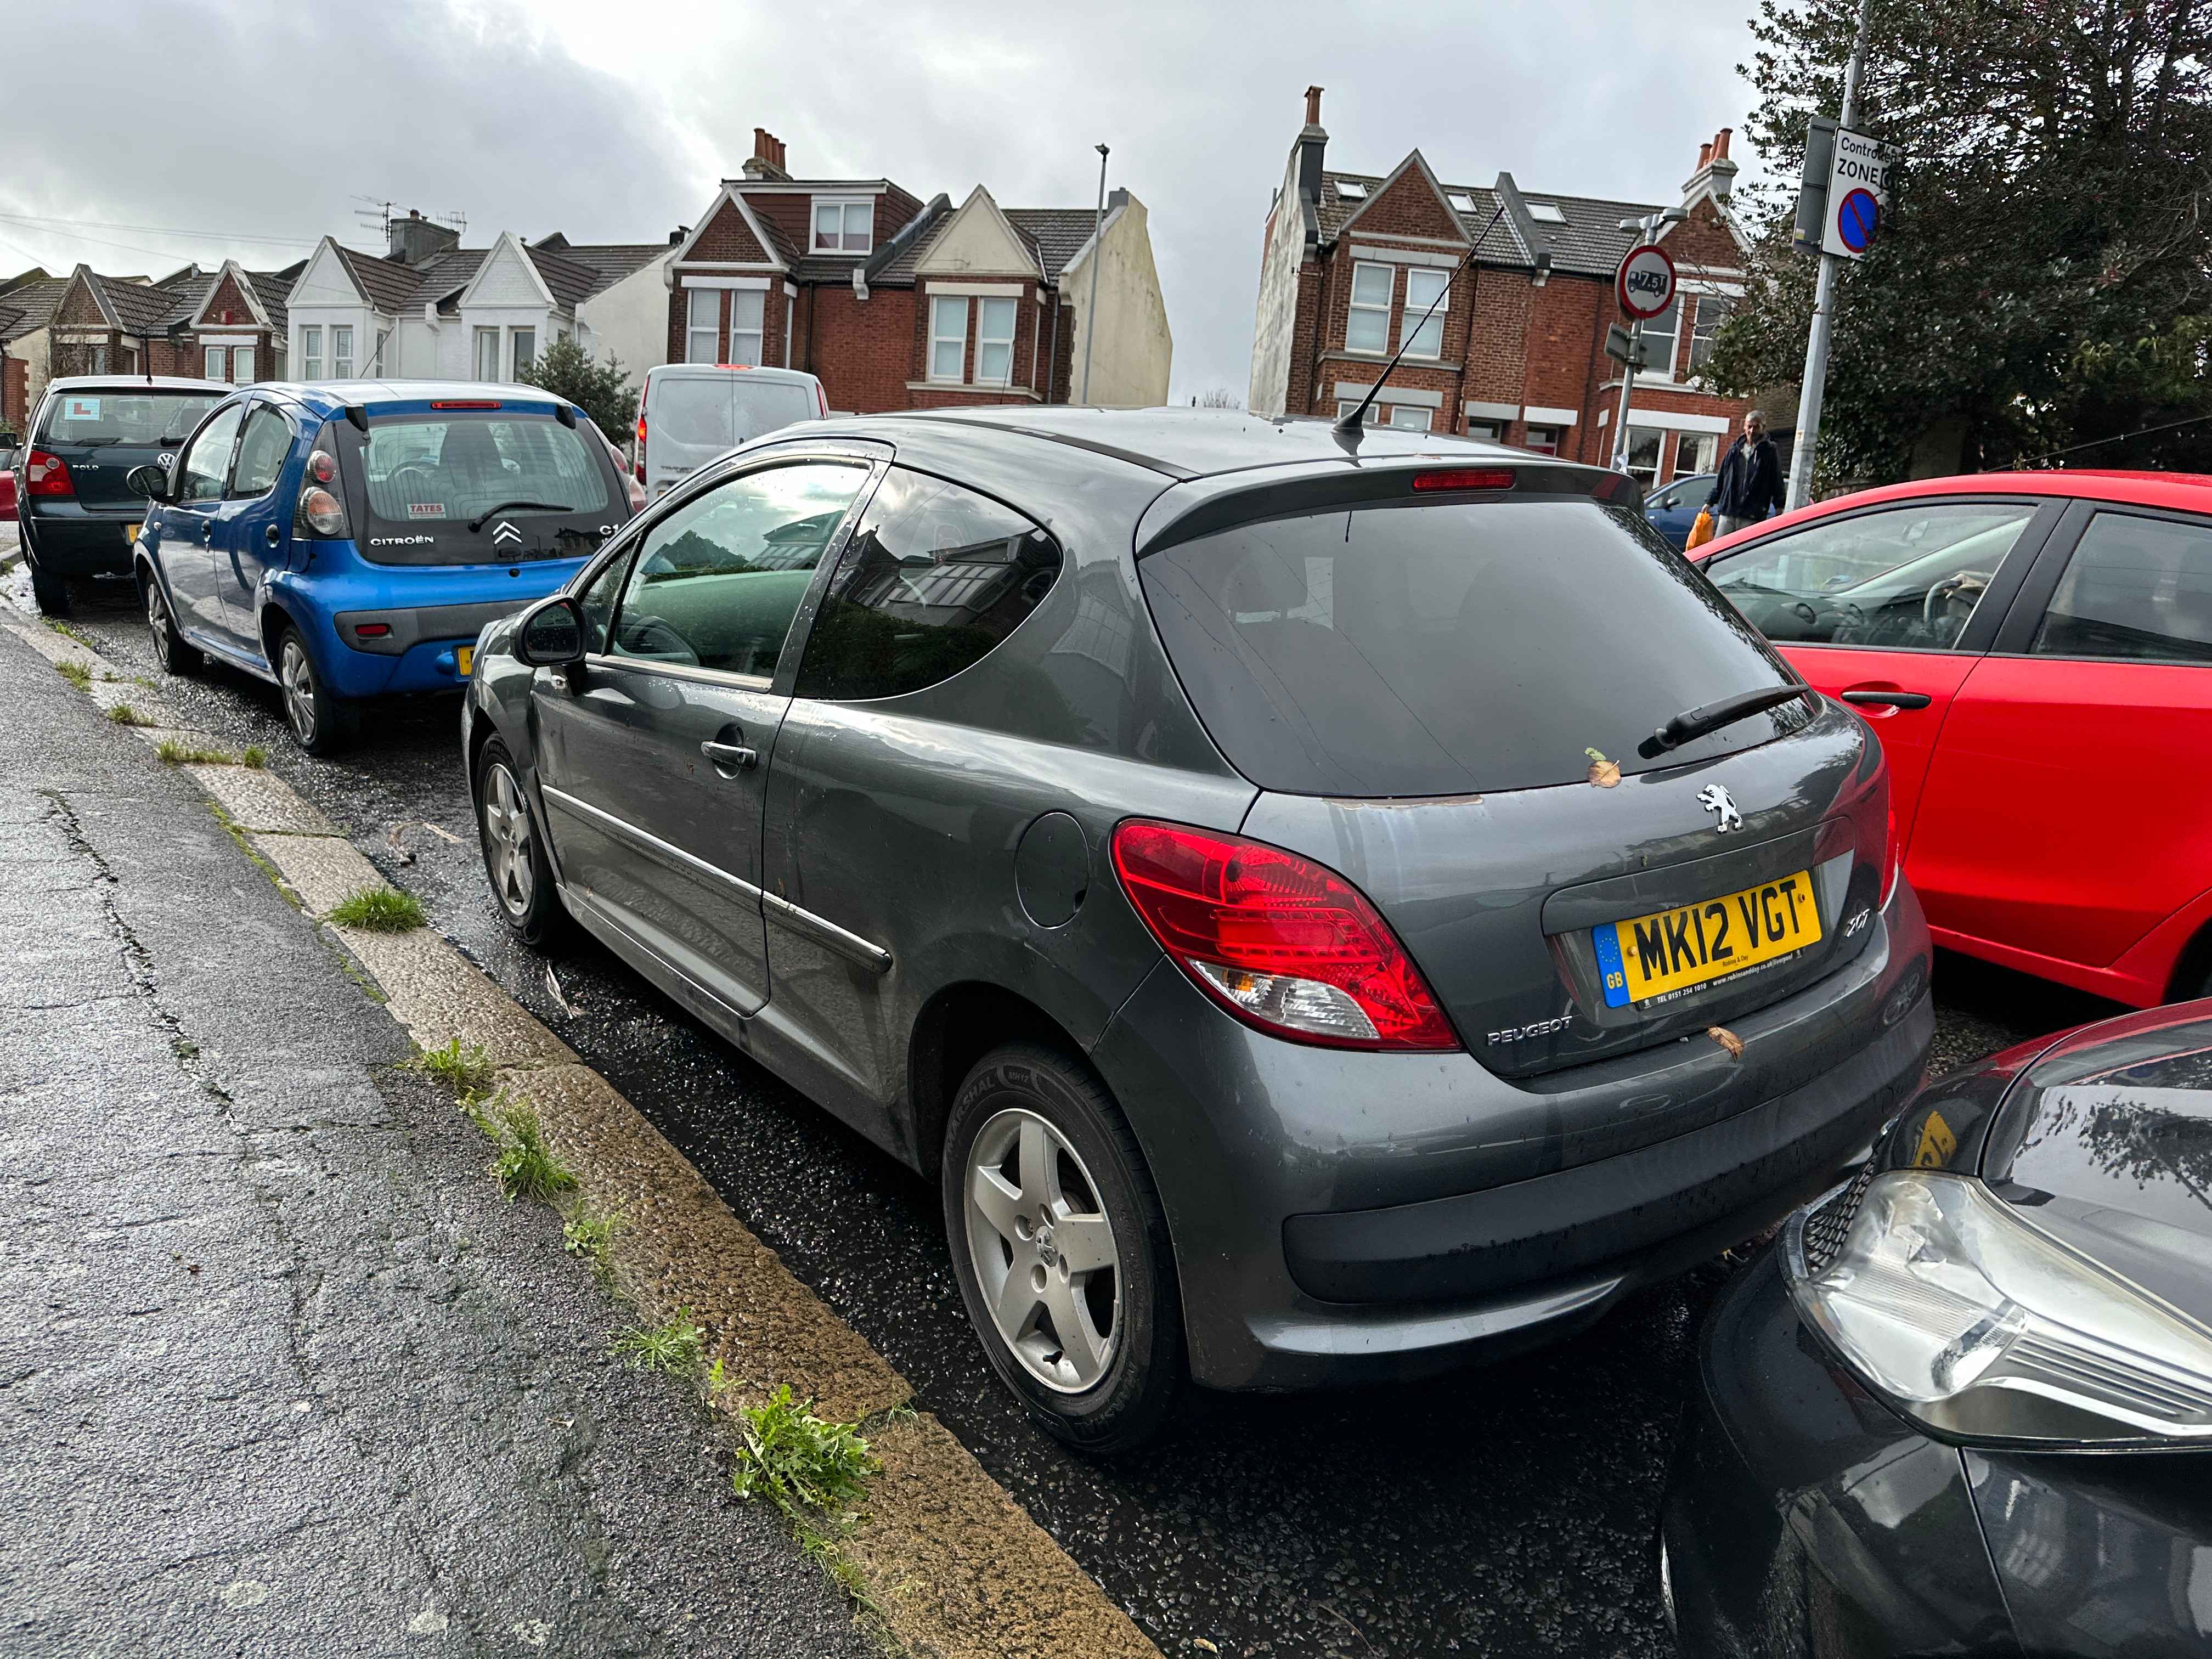 Photograph of MK12 VGT - a Grey Peugeot 207 parked in Hollingdean by a non-resident who uses the local area as part of their Brighton commute. The first of six photographs supplied by the residents of Hollingdean.